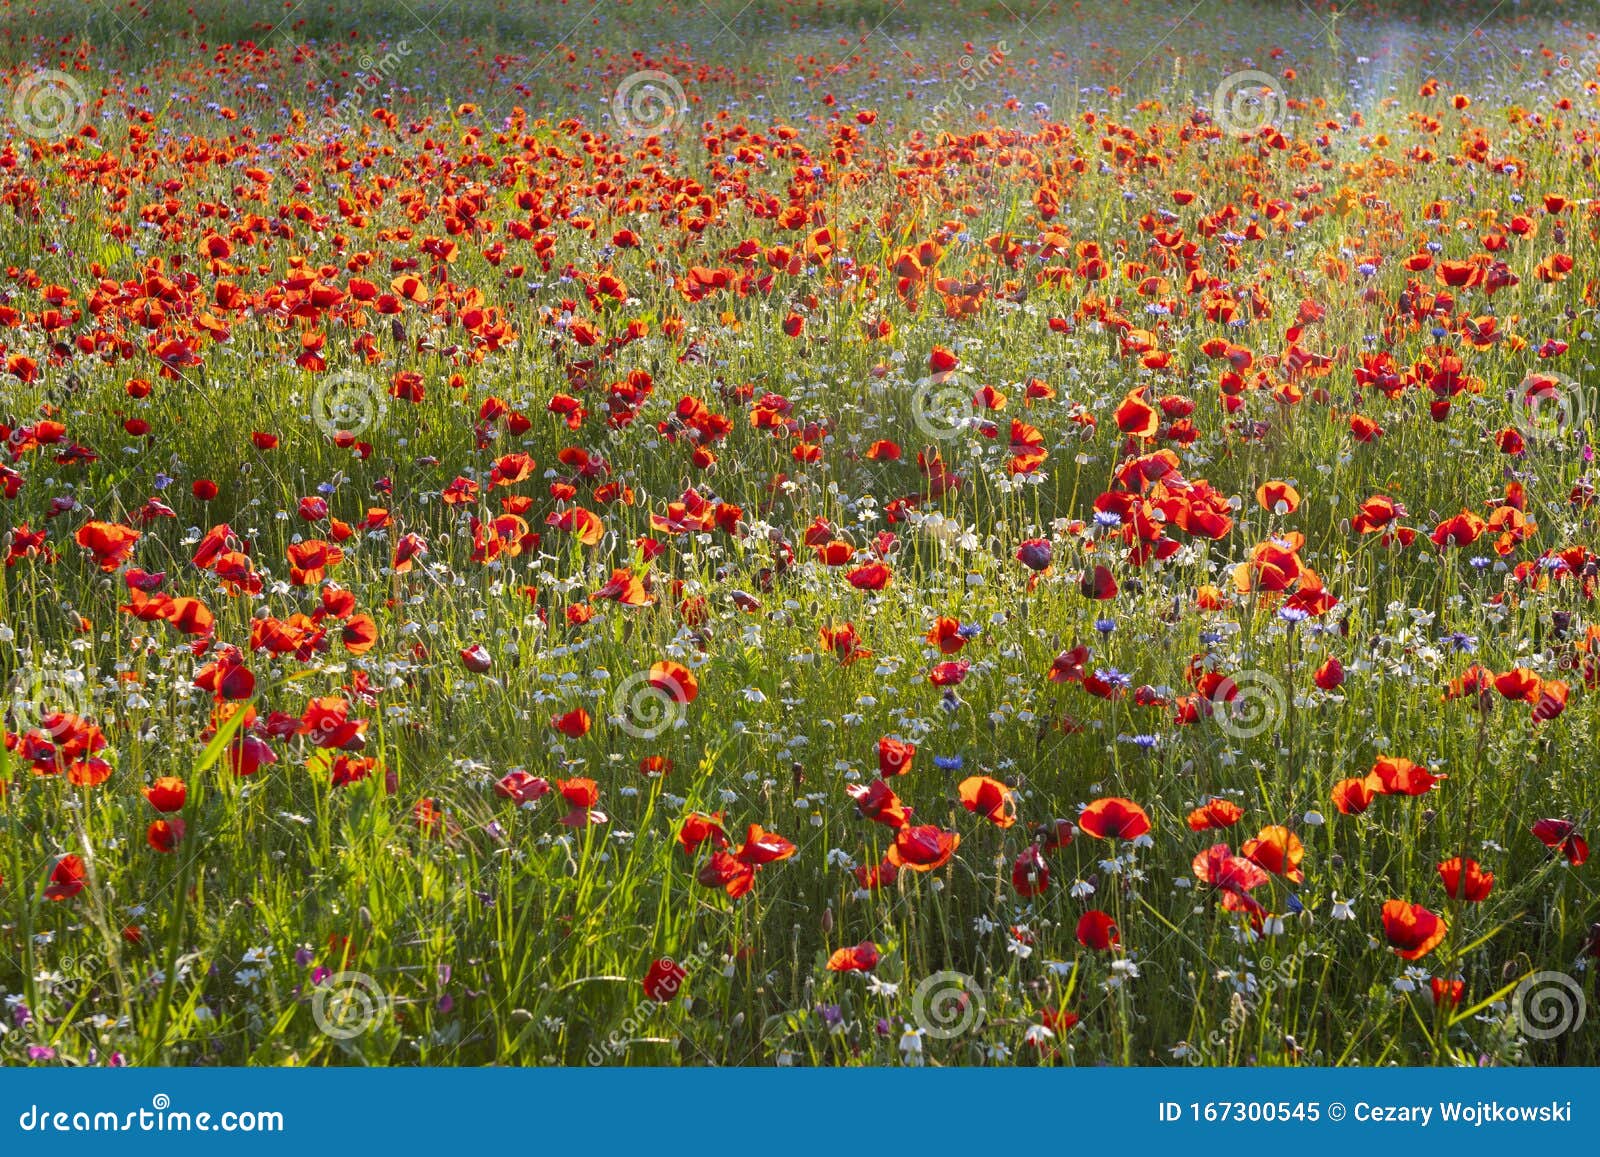 spring meadow filled with poppies, pienza, val d`orcia, tuscany, italy